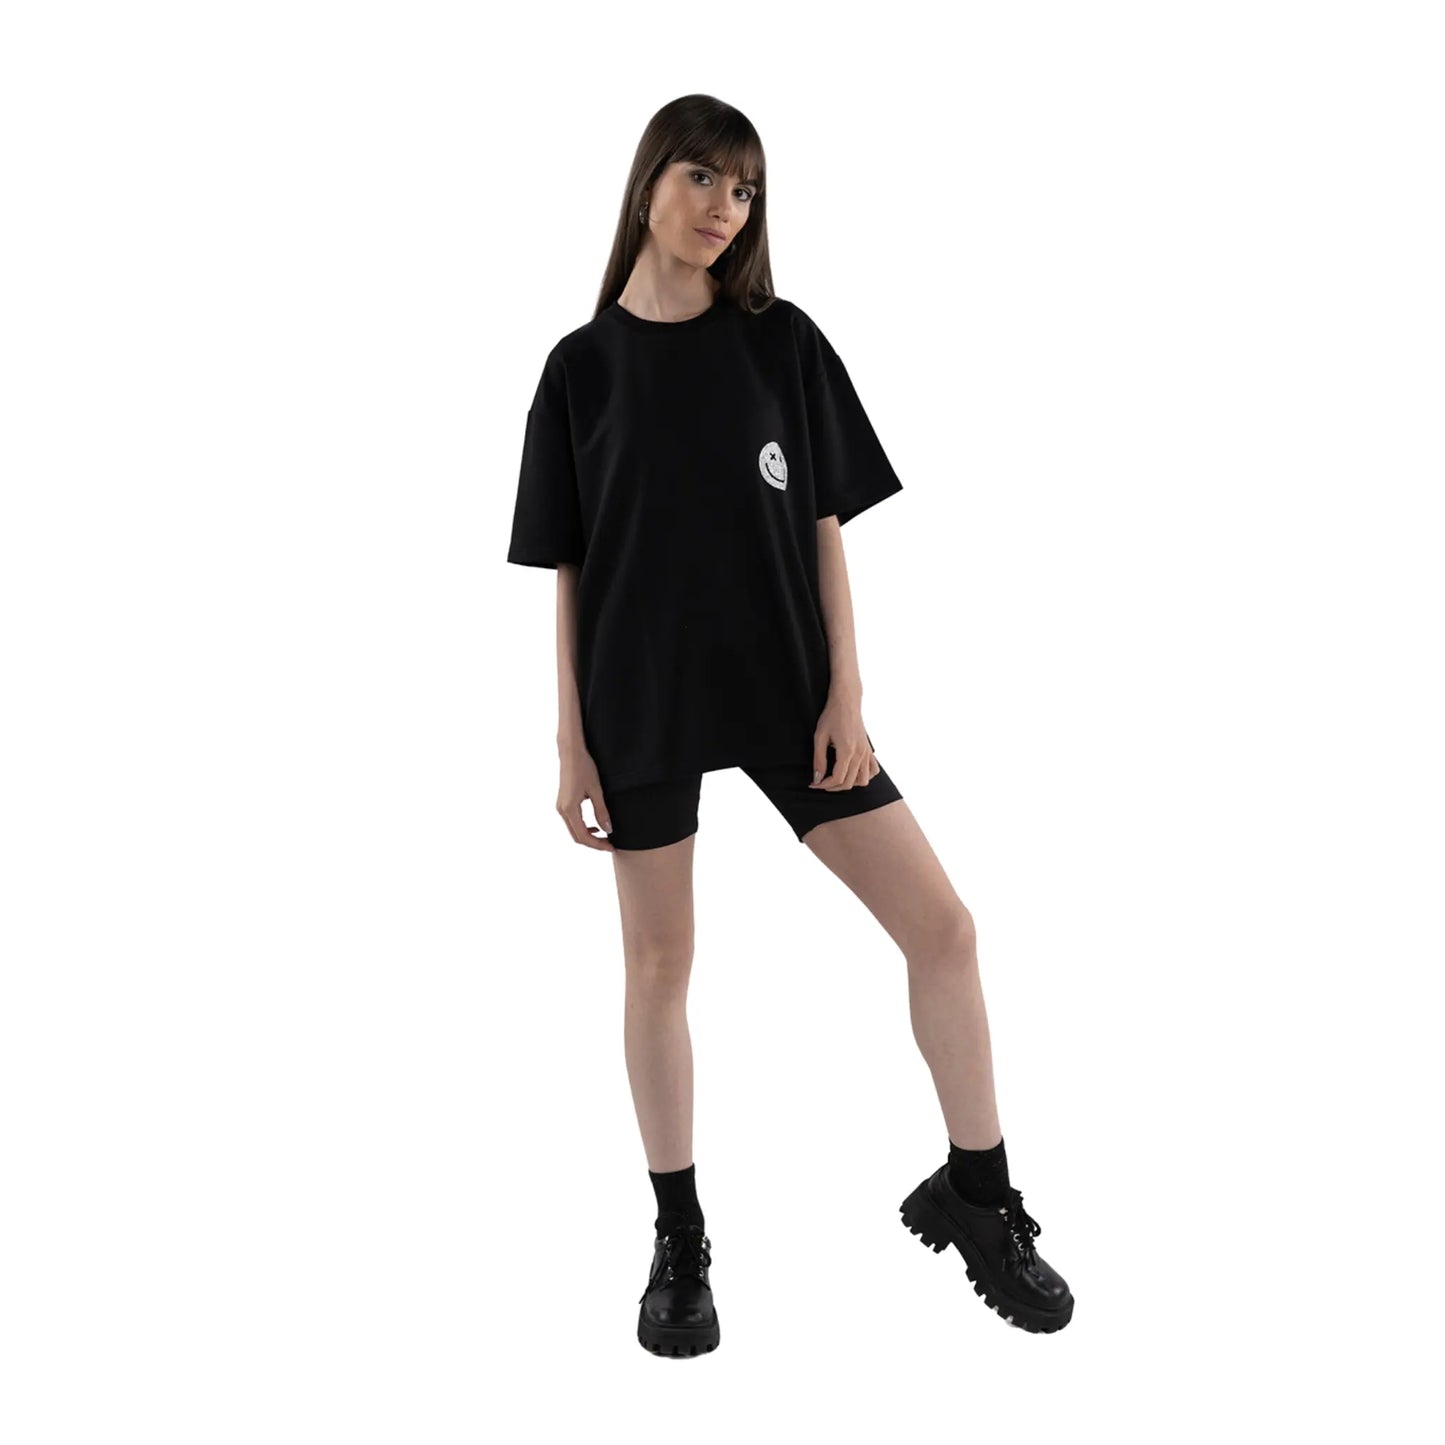 Glitter Smiley Oversized T-shirt Black on brunette woman wearing shorts front view